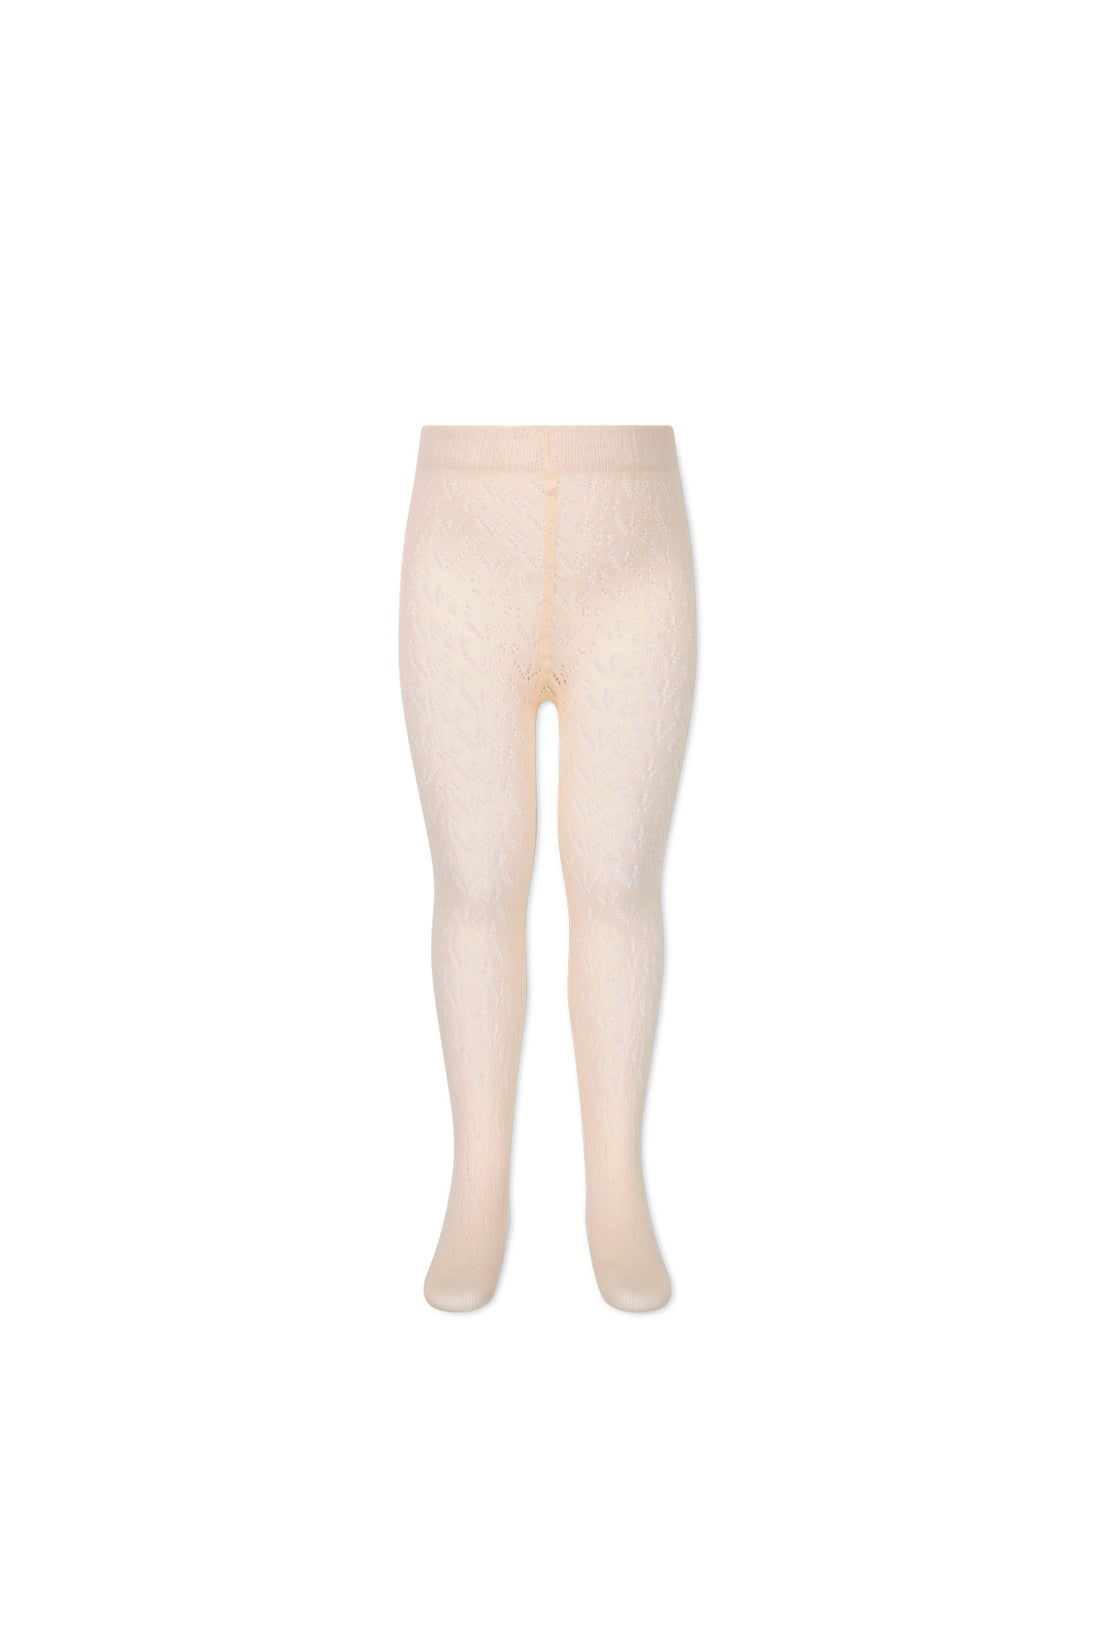 Lillian Tight - Boto Pink Childrens Tight from Jamie Kay NZ